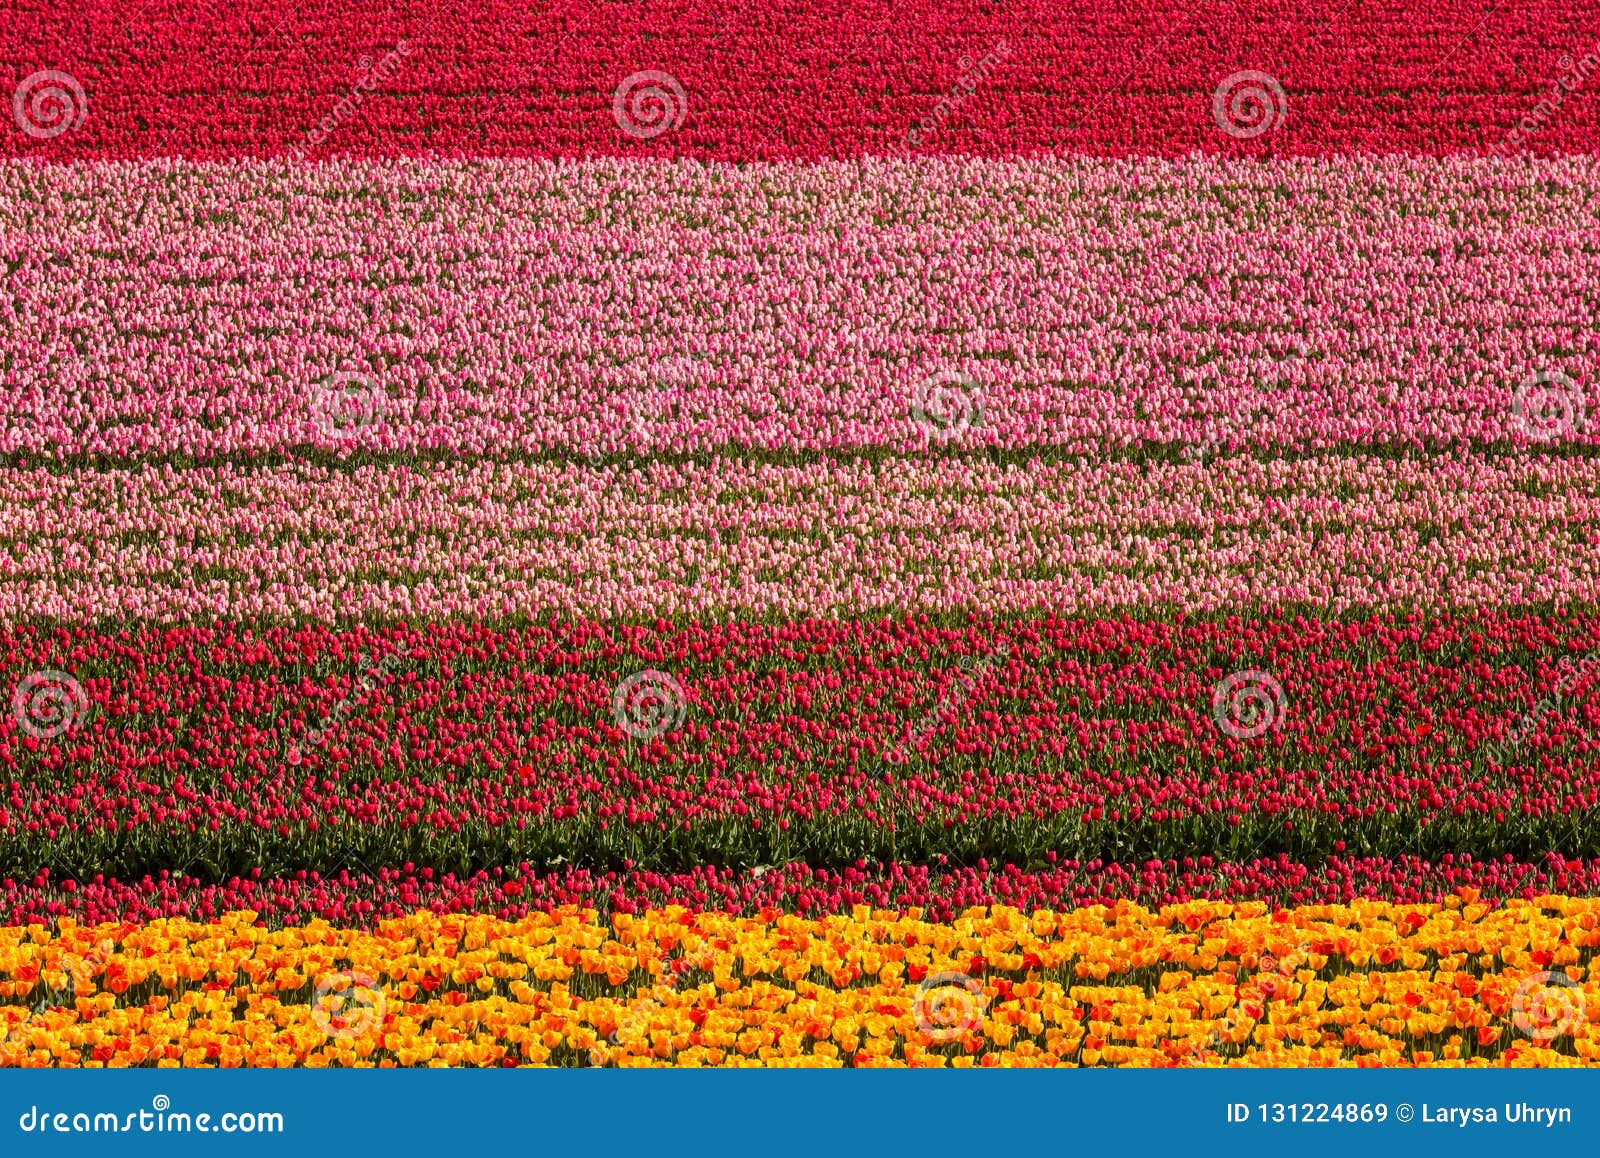 Tulip Field Nature Abstract Background, Aerial View, Netherlands Stock ...